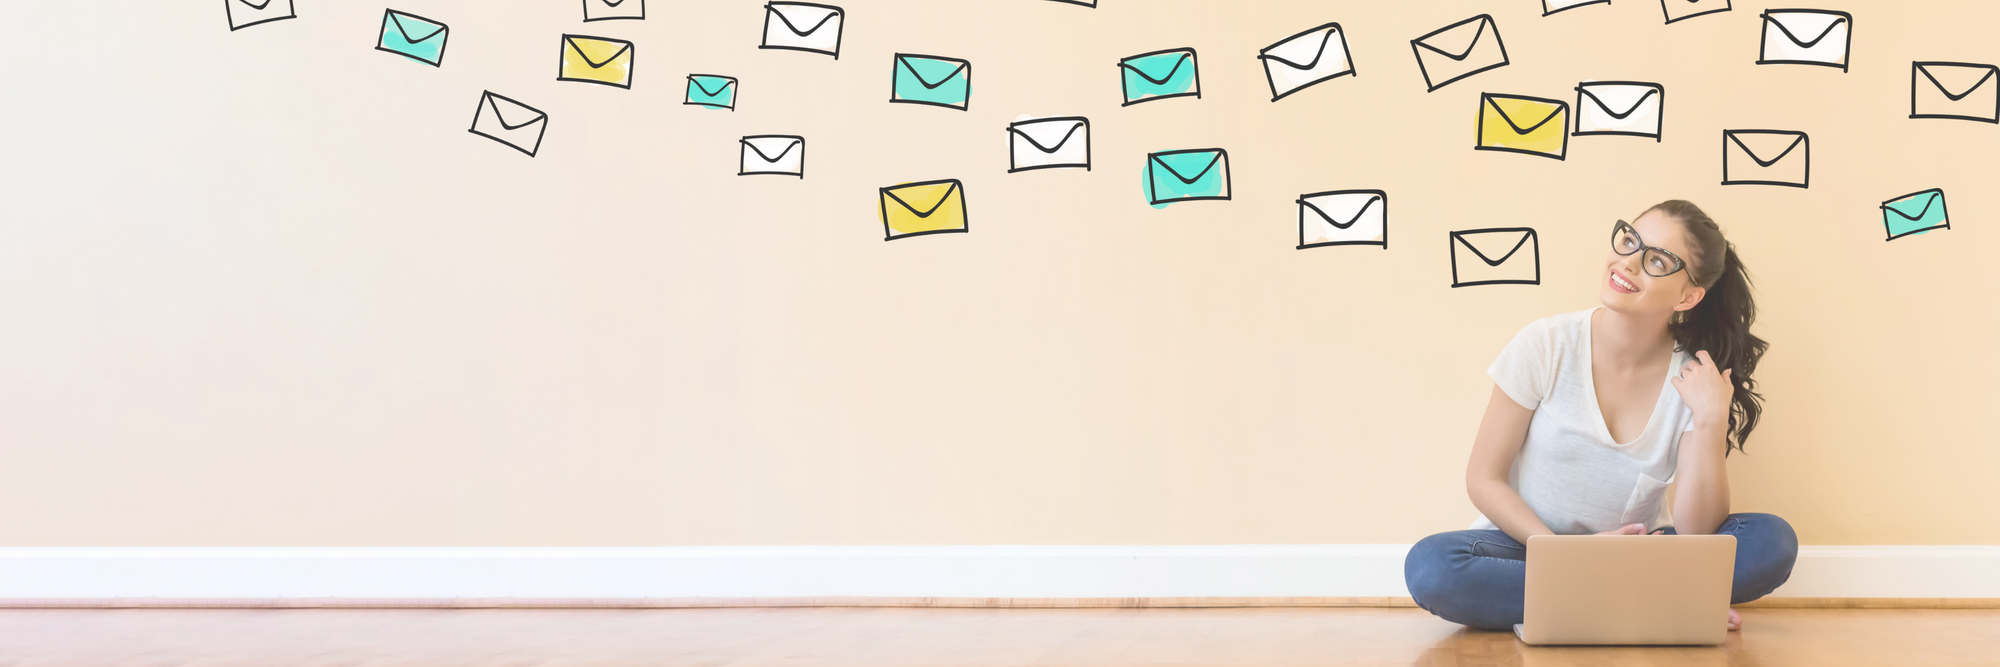 Email Management Virtual Assistant: An In-depth Guide For 2023